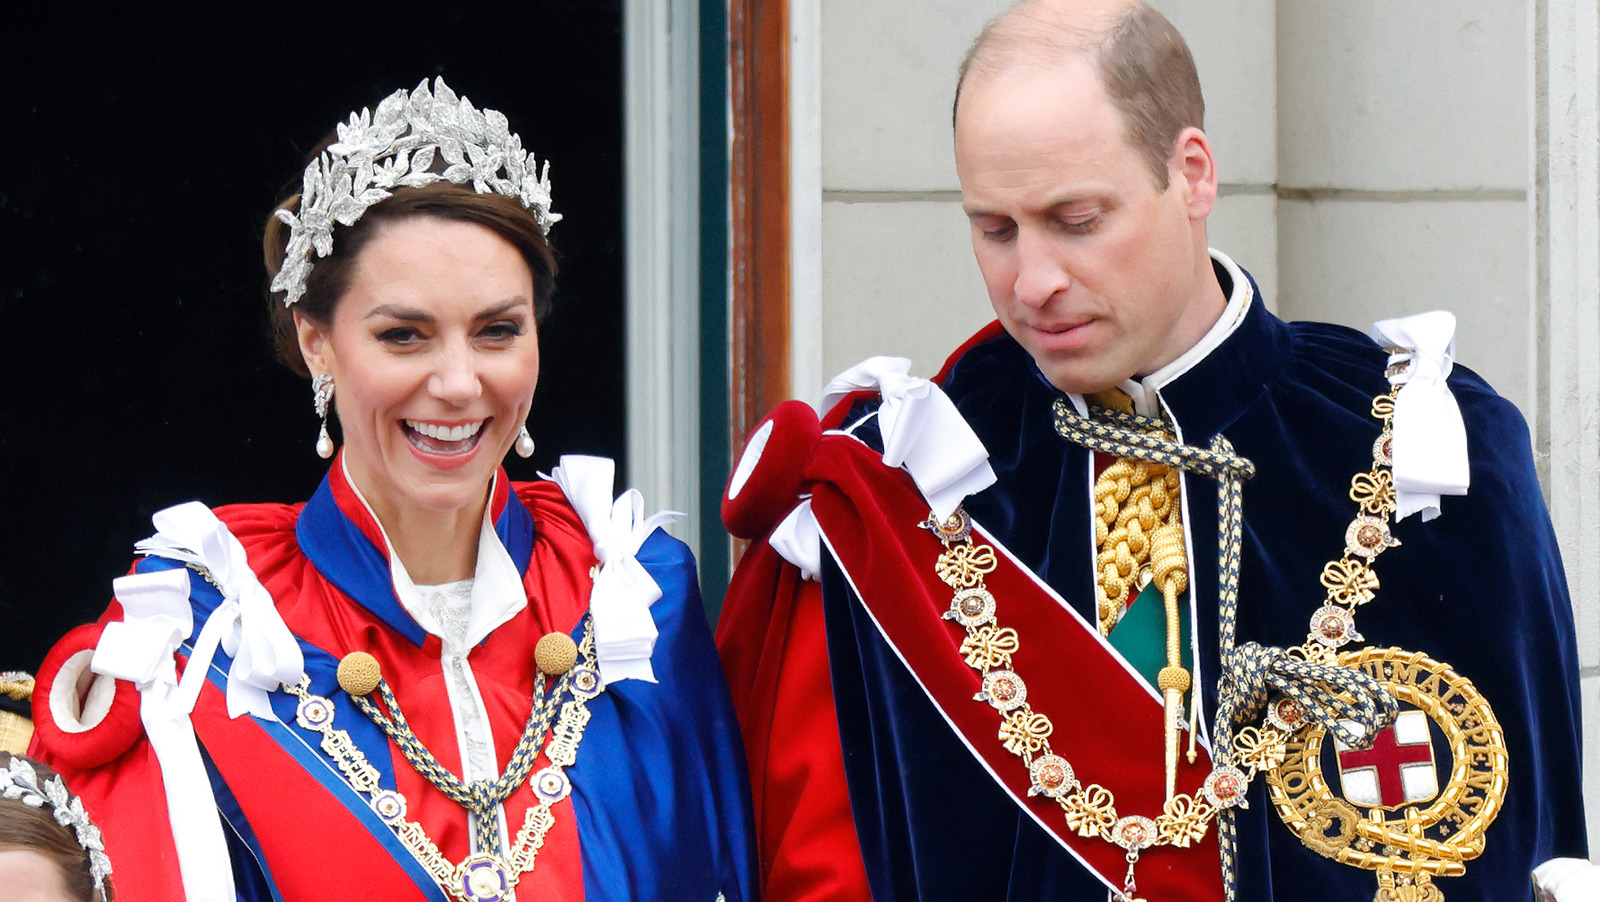 Sashes Worn By Royal Families Explained